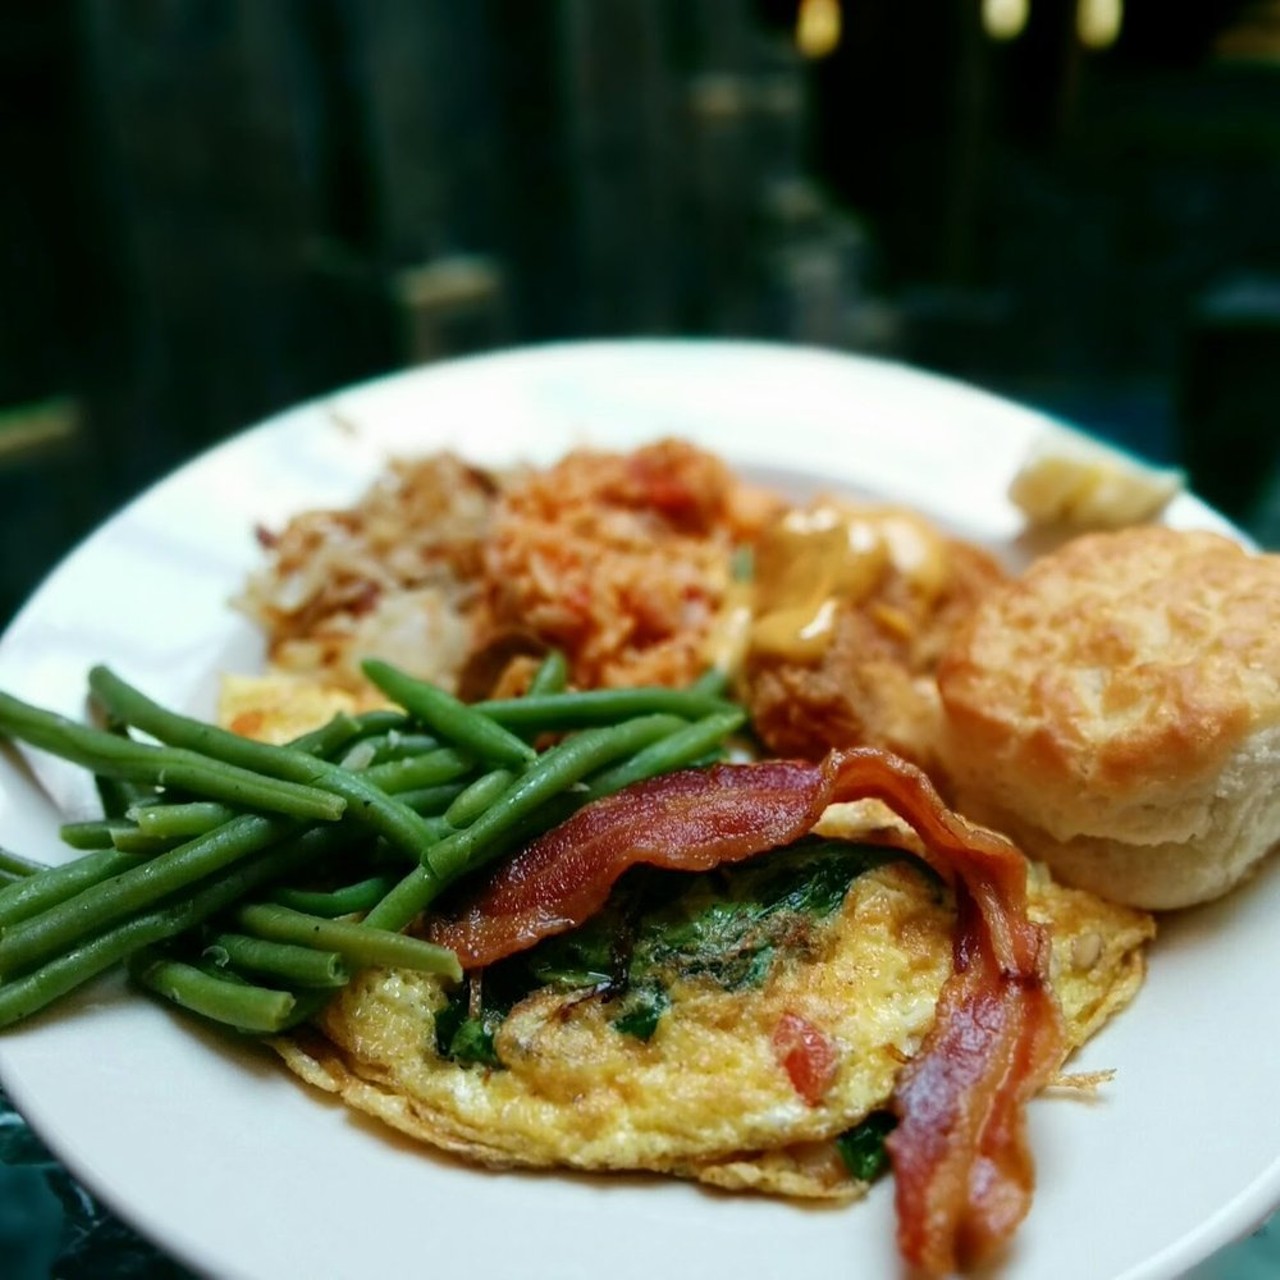 Fishbone&#146;s
Multiple locations
With 3 locations, the options are endless for Easter brunch. You can call to make a reservation or do a walk-in. Photo via Yelp user Travis S.